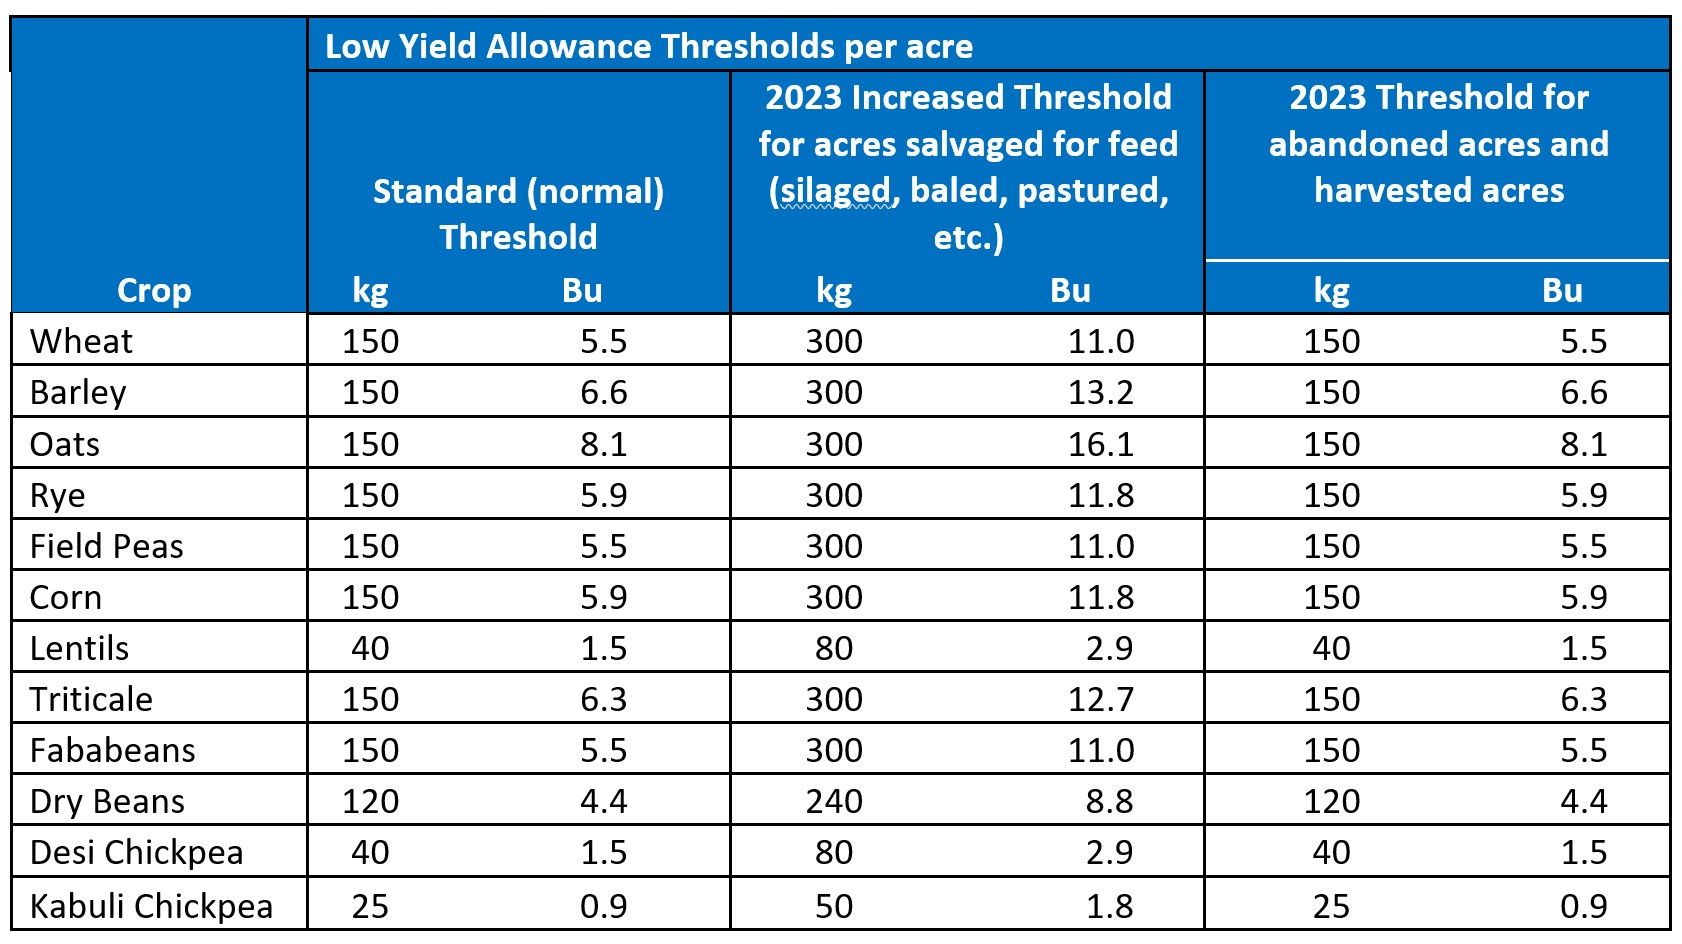 Low yield allowance table for 2023. Please call AFSC for details.